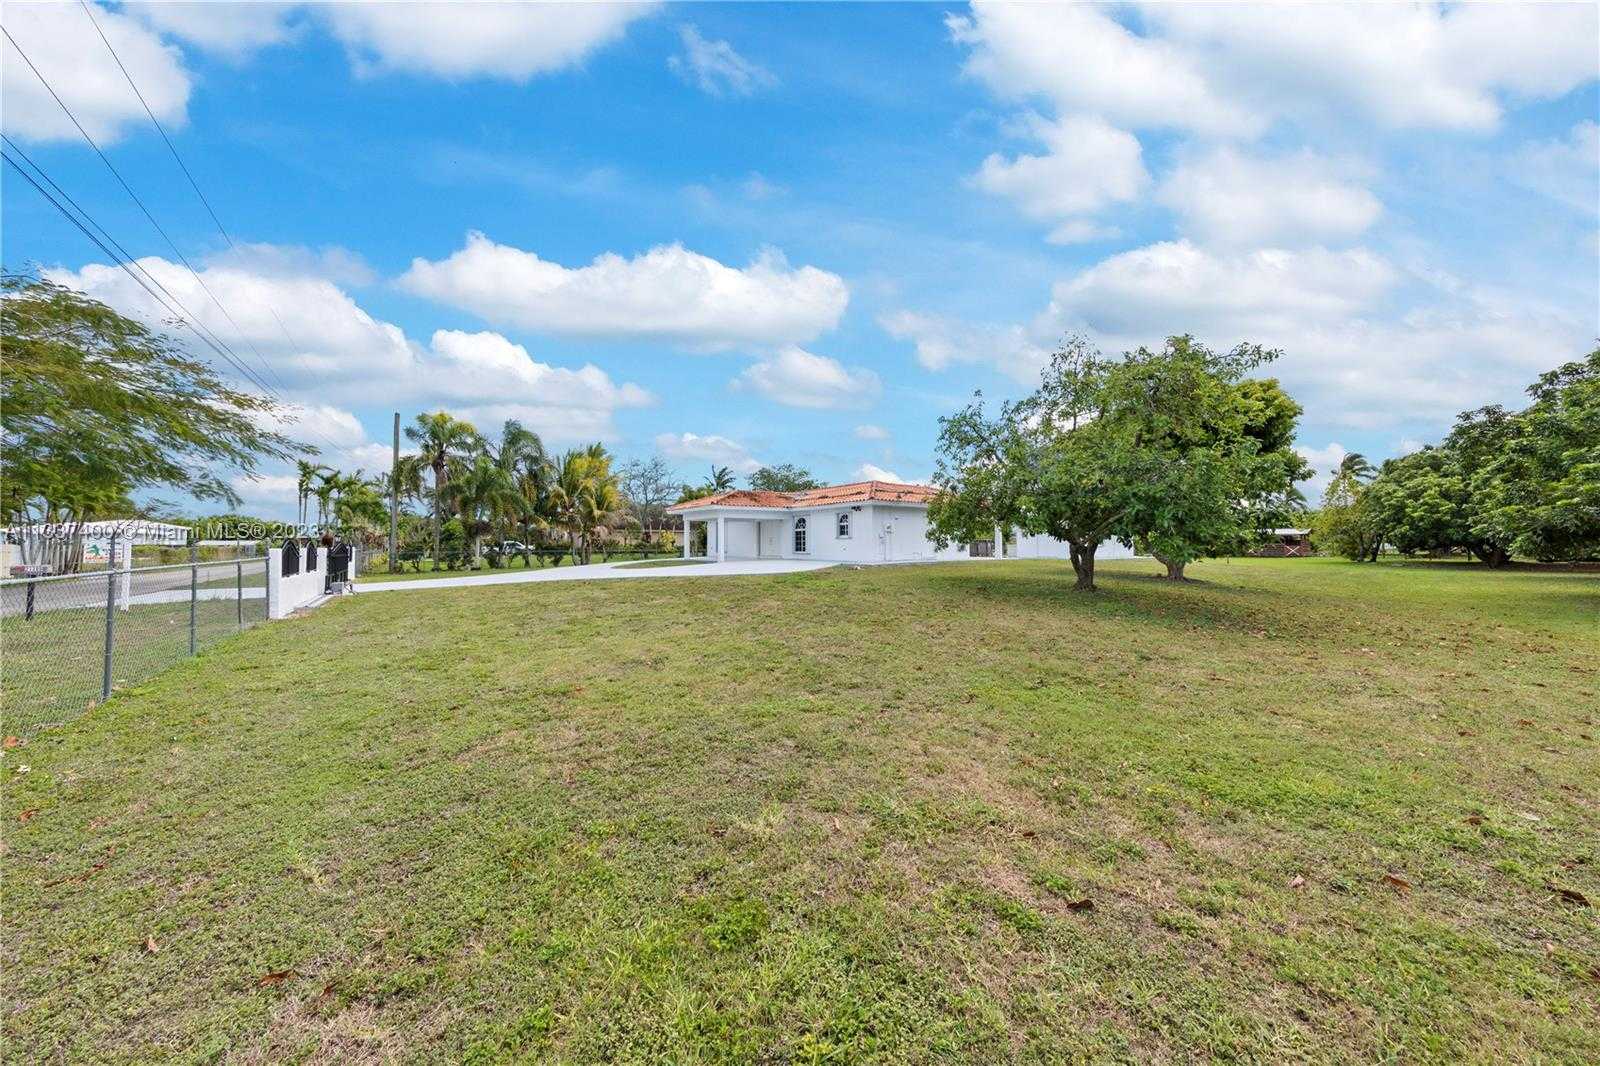 House in Homestead, Florida 11622522